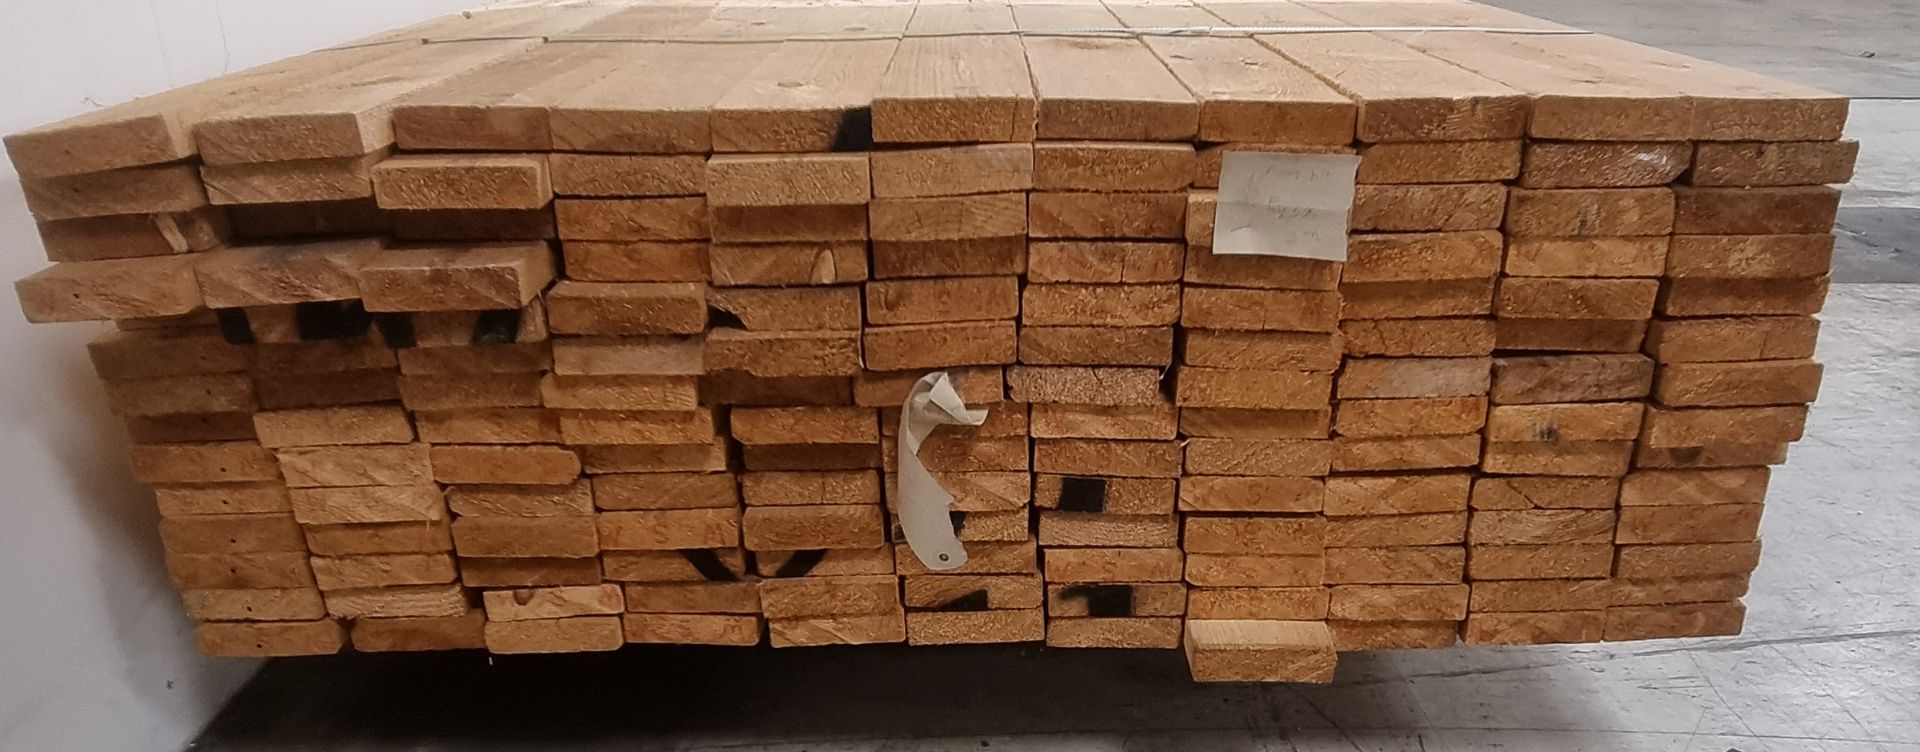 Pallet of 4"x1" (10x2.5cm) softwood, heat treated and debarked (GBFC-0452 DBHT) - L360cm - 154 pcs - Image 3 of 4